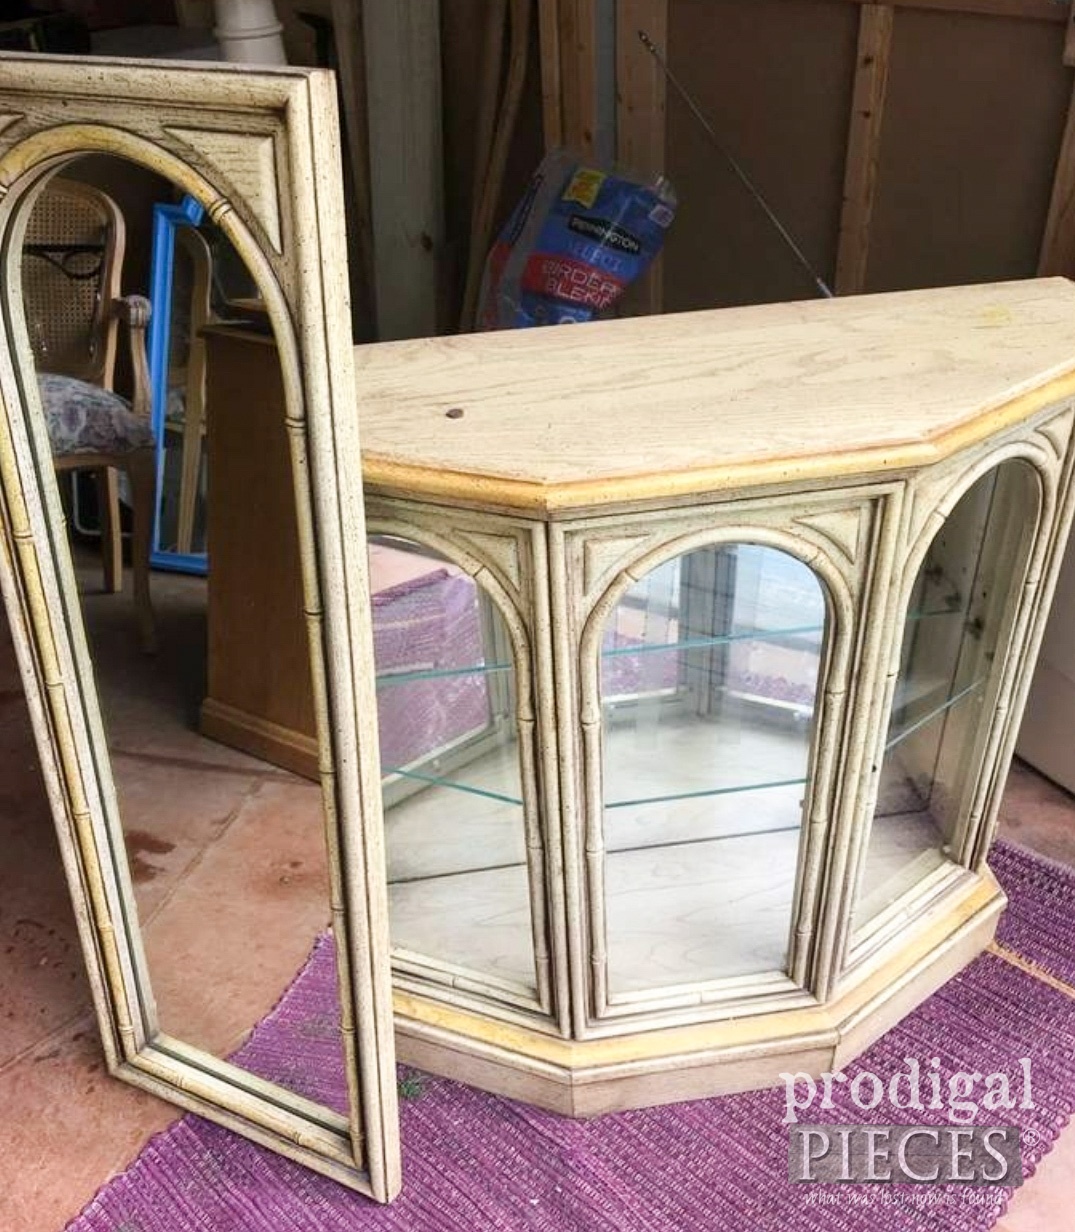 Vintage Curio Cabinet and Mirror Before Makeover by Larissa of Prodigal Pieces | prodigalpieces.com #prodigalpieces